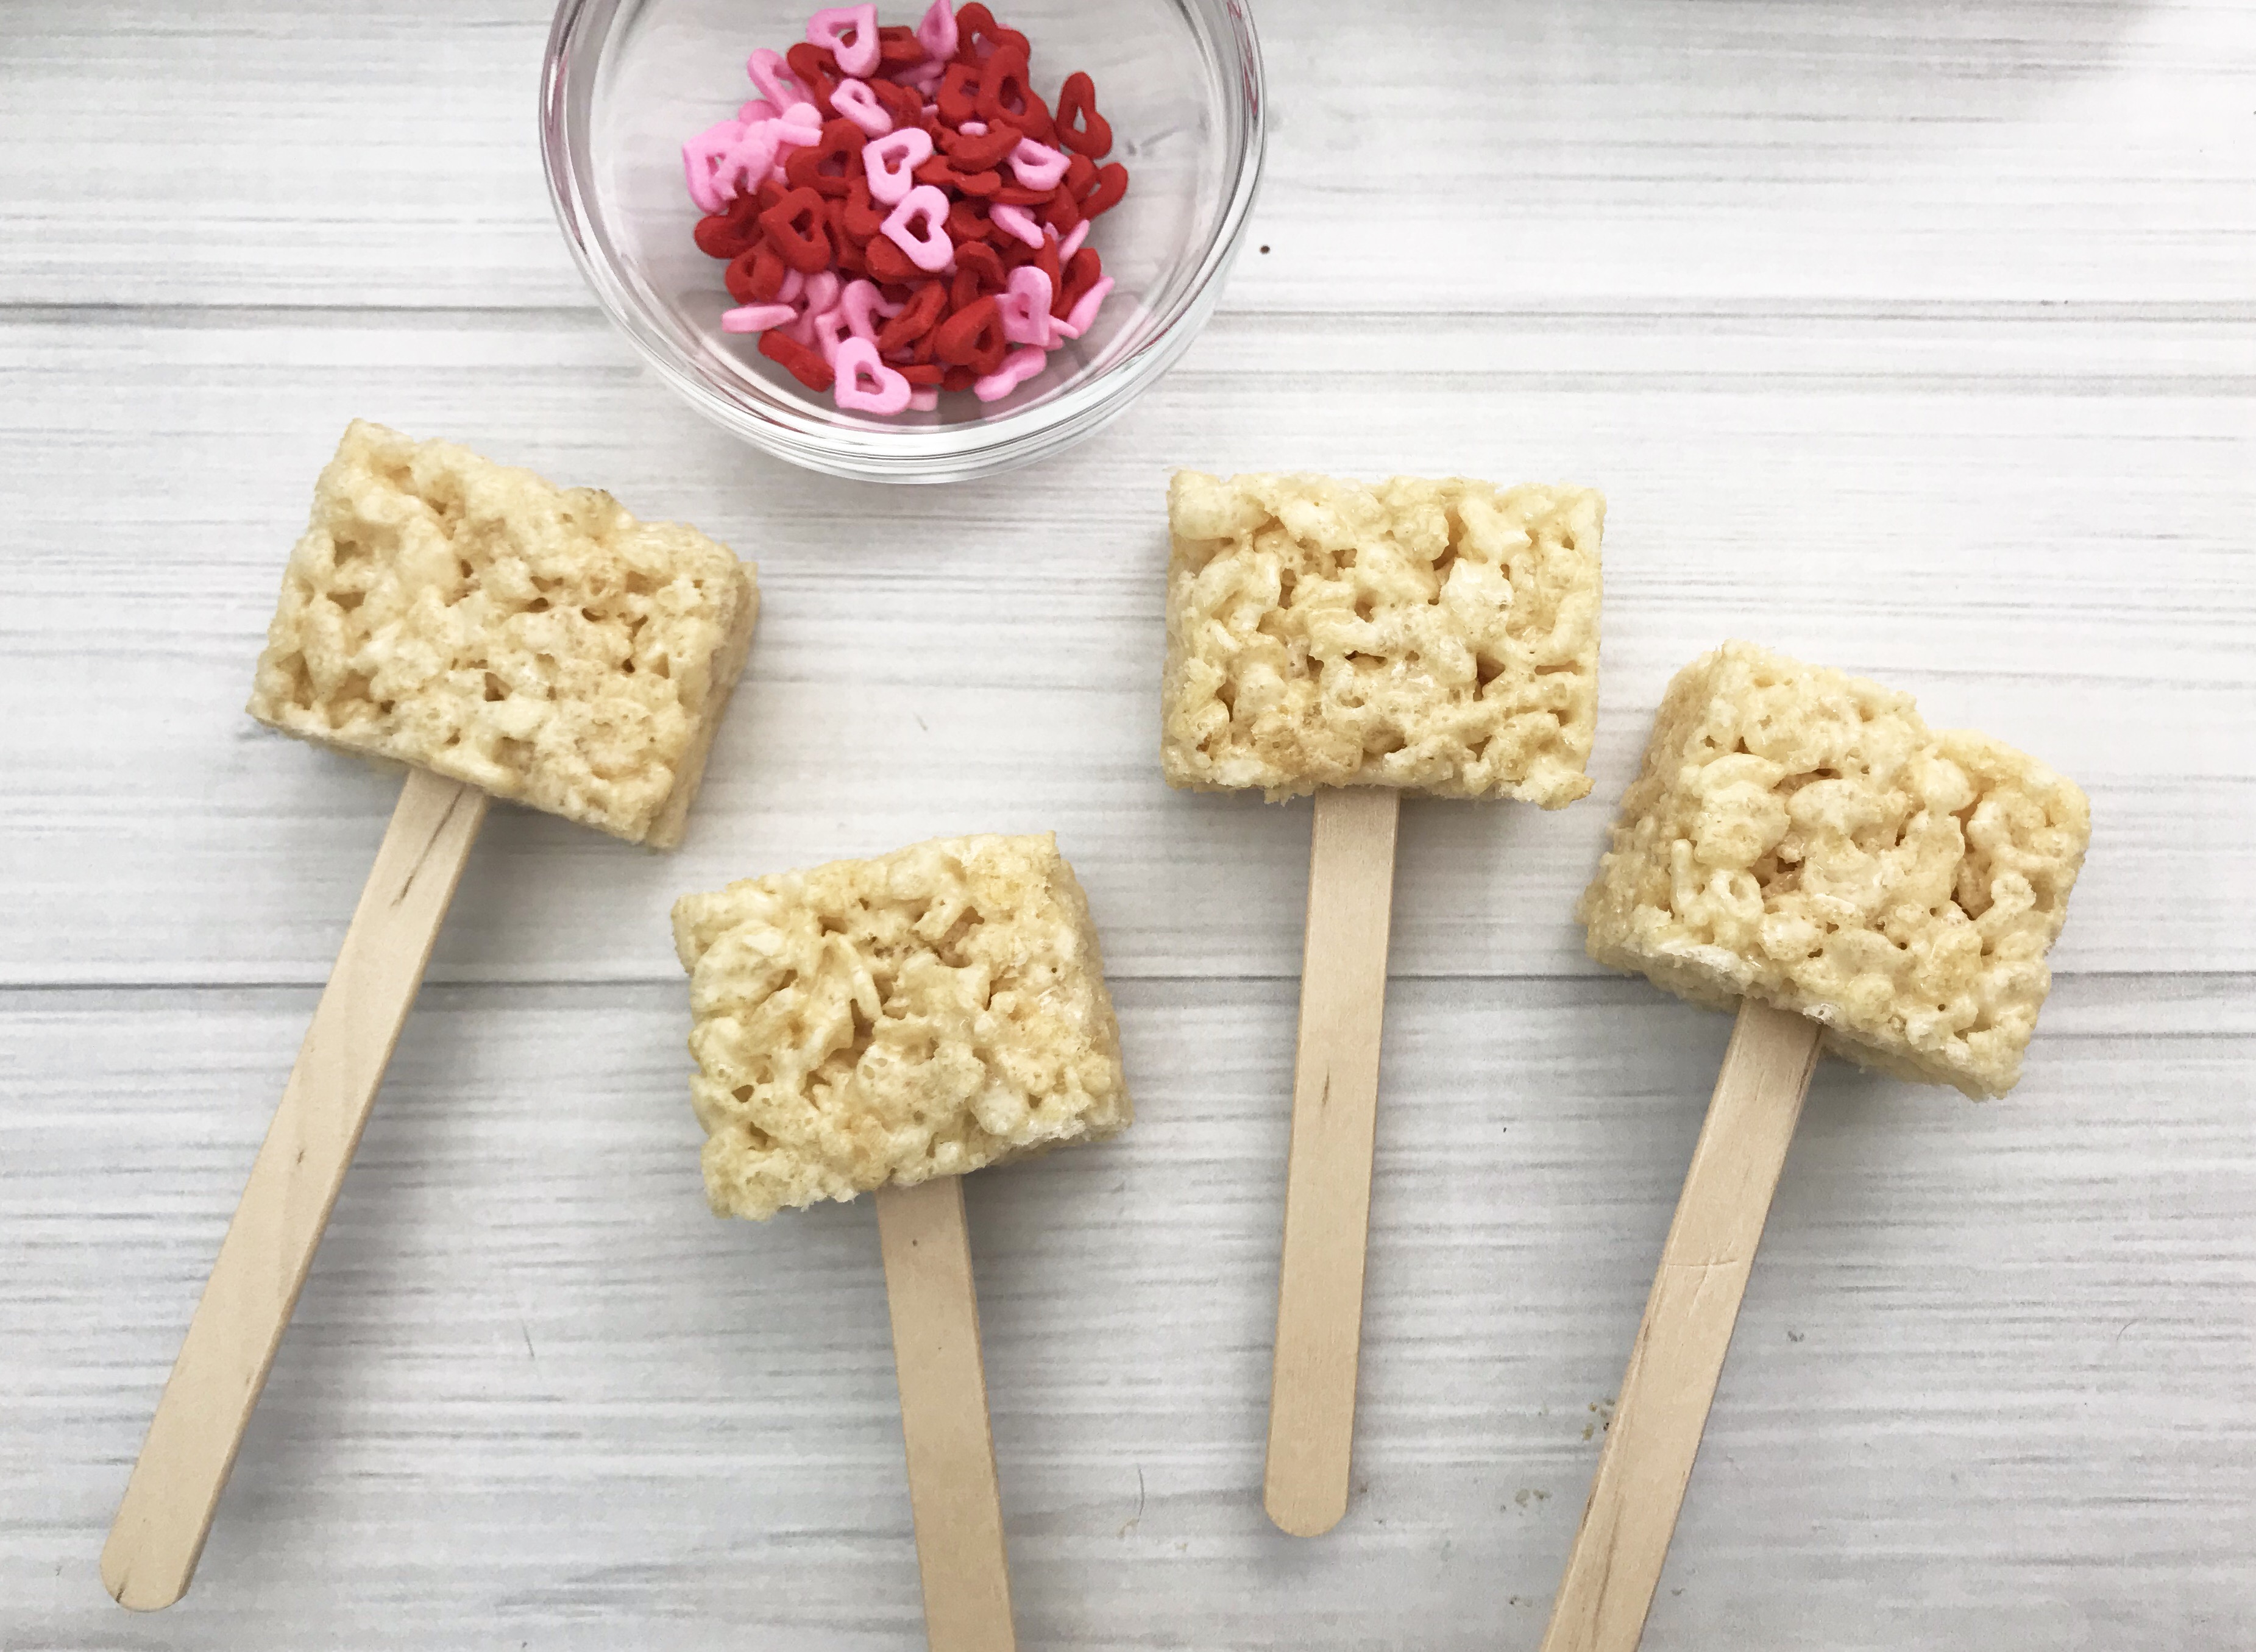 Looking for a fun Grinch treat? These simple to make Grinch Pops, which are Grinch Rice Crispy Treats will be a hit whether you make them for the kids, for a party or for a get-together. I think even the Grinch's heart would grow with these easy Christmas treats.